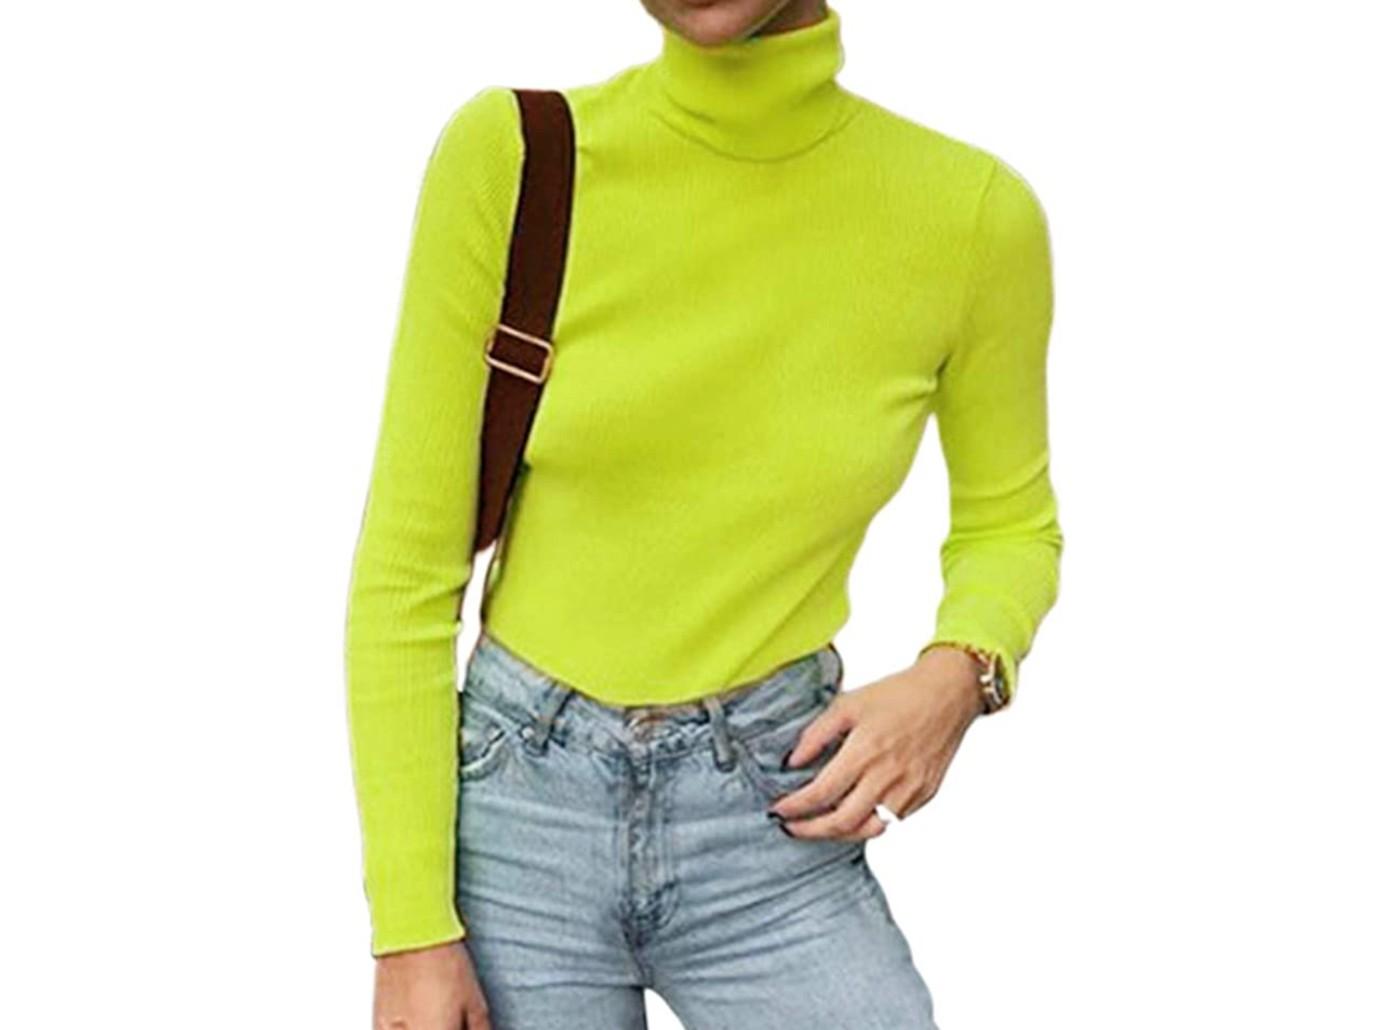 WornOnTV: Sara's yellow turtleneck top and high-waisted pants on The Chase, Sara Haines